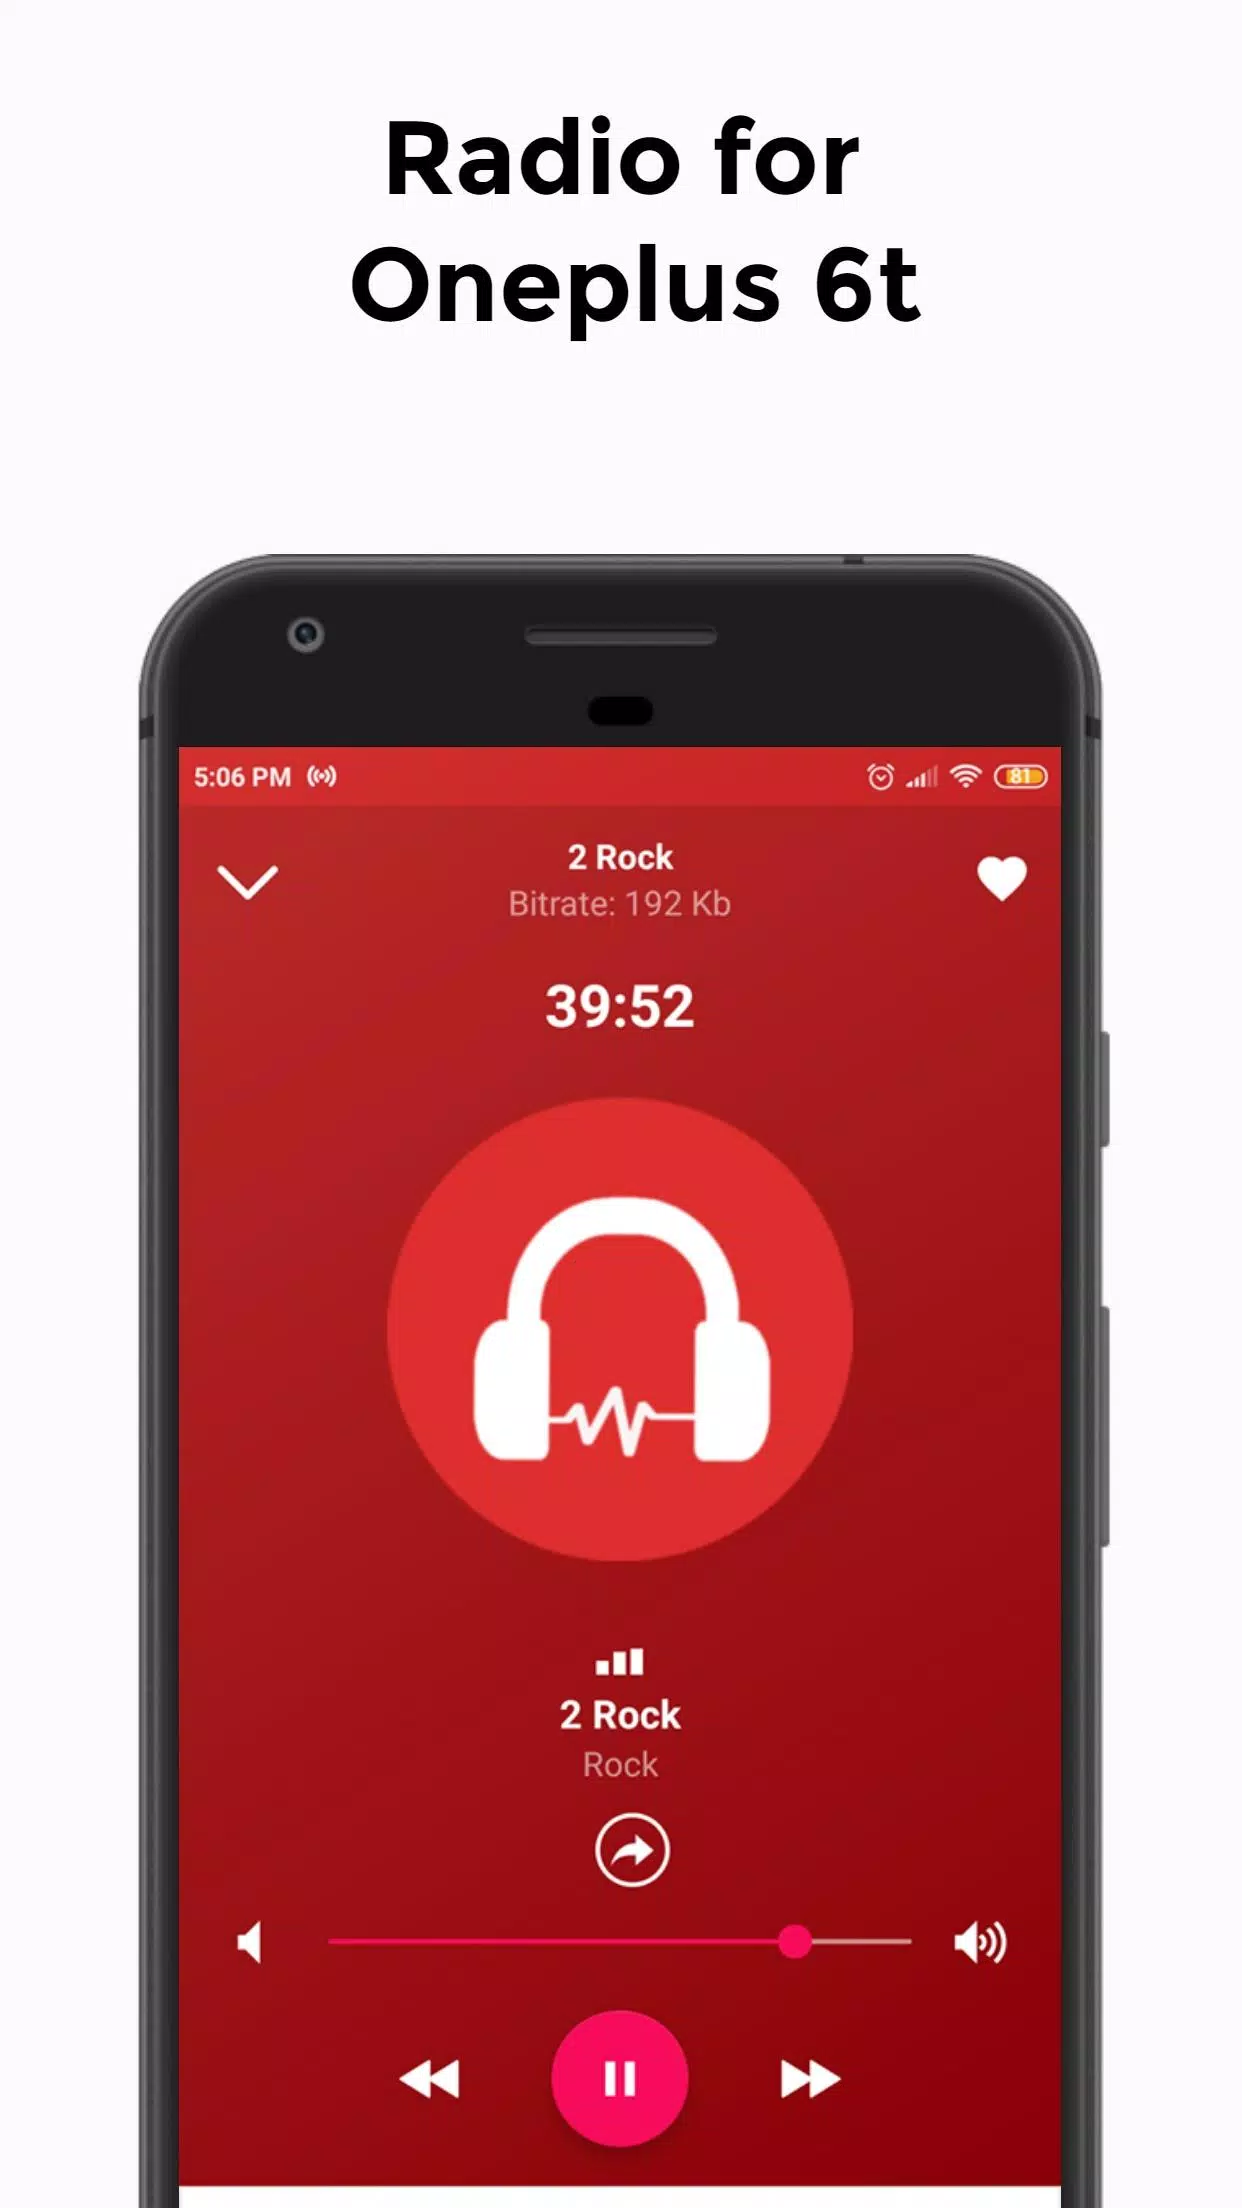 Radio for Oneplus 6t Free for Android - APK Download